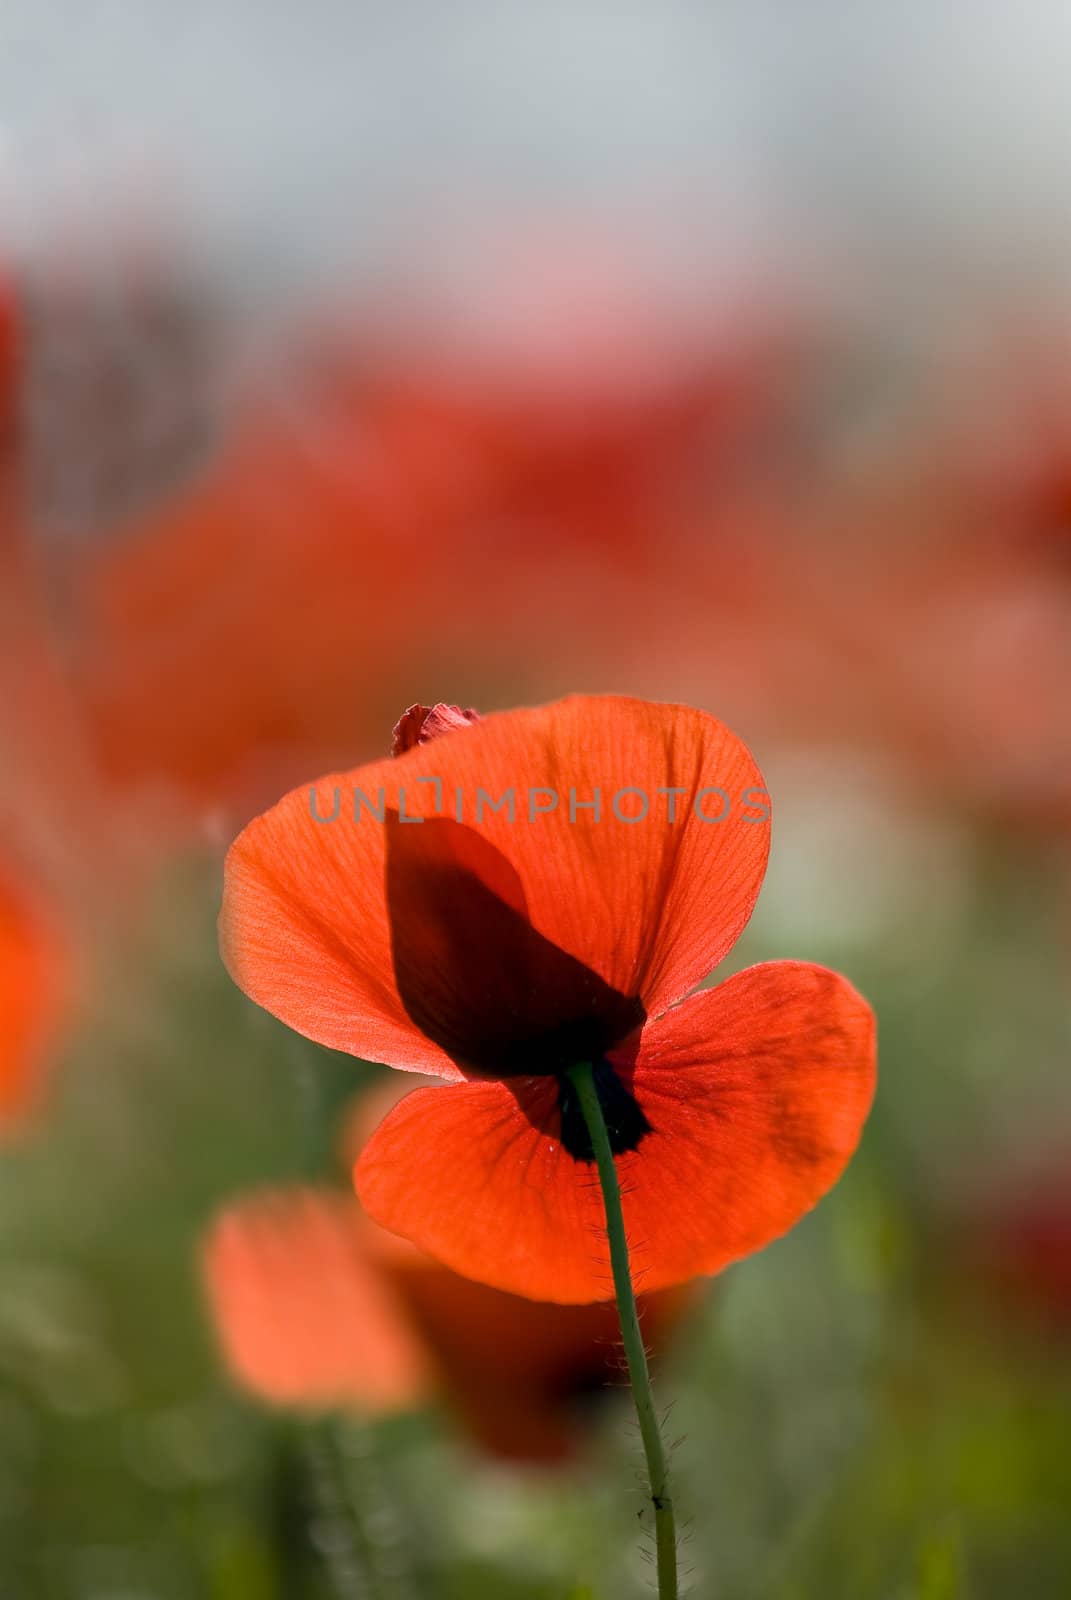 Poppy flower in back light in summer by AlessandroZocc